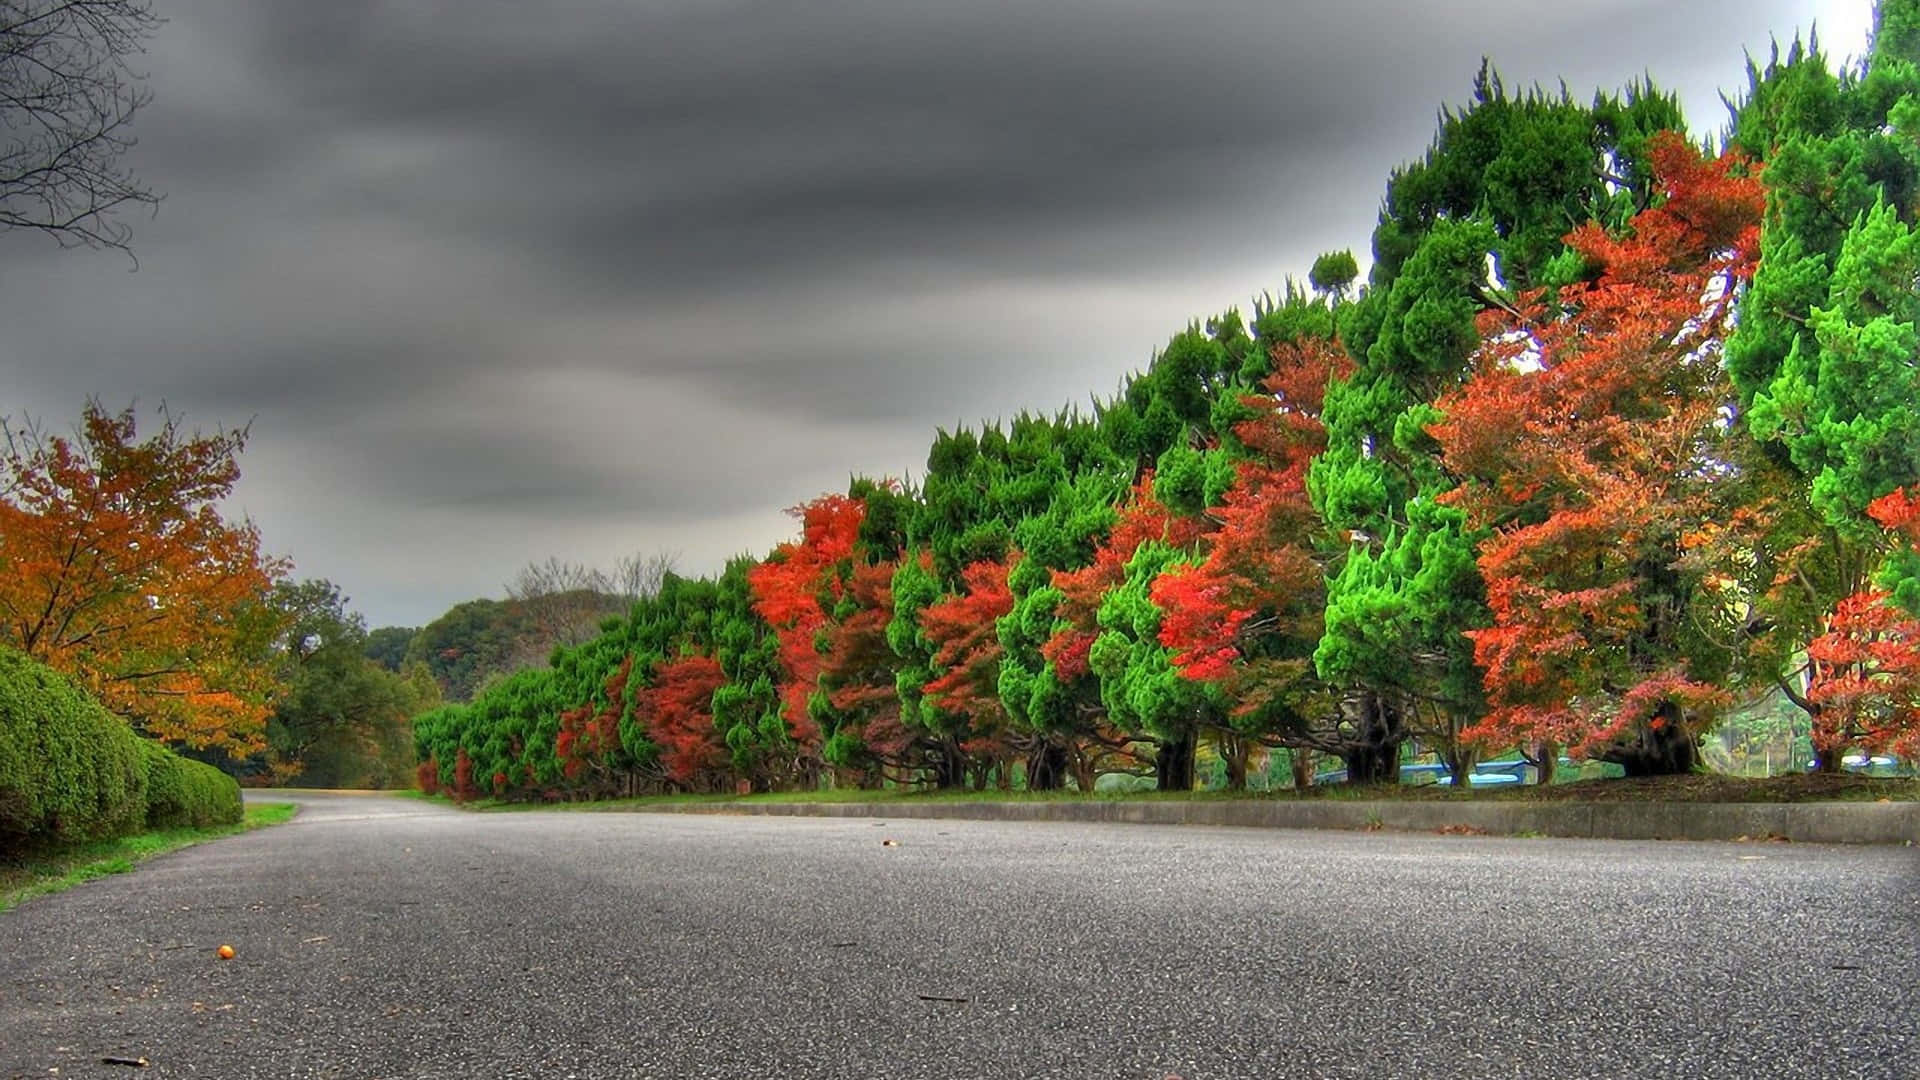 a road lined with trees with colorful leaves Wallpaper